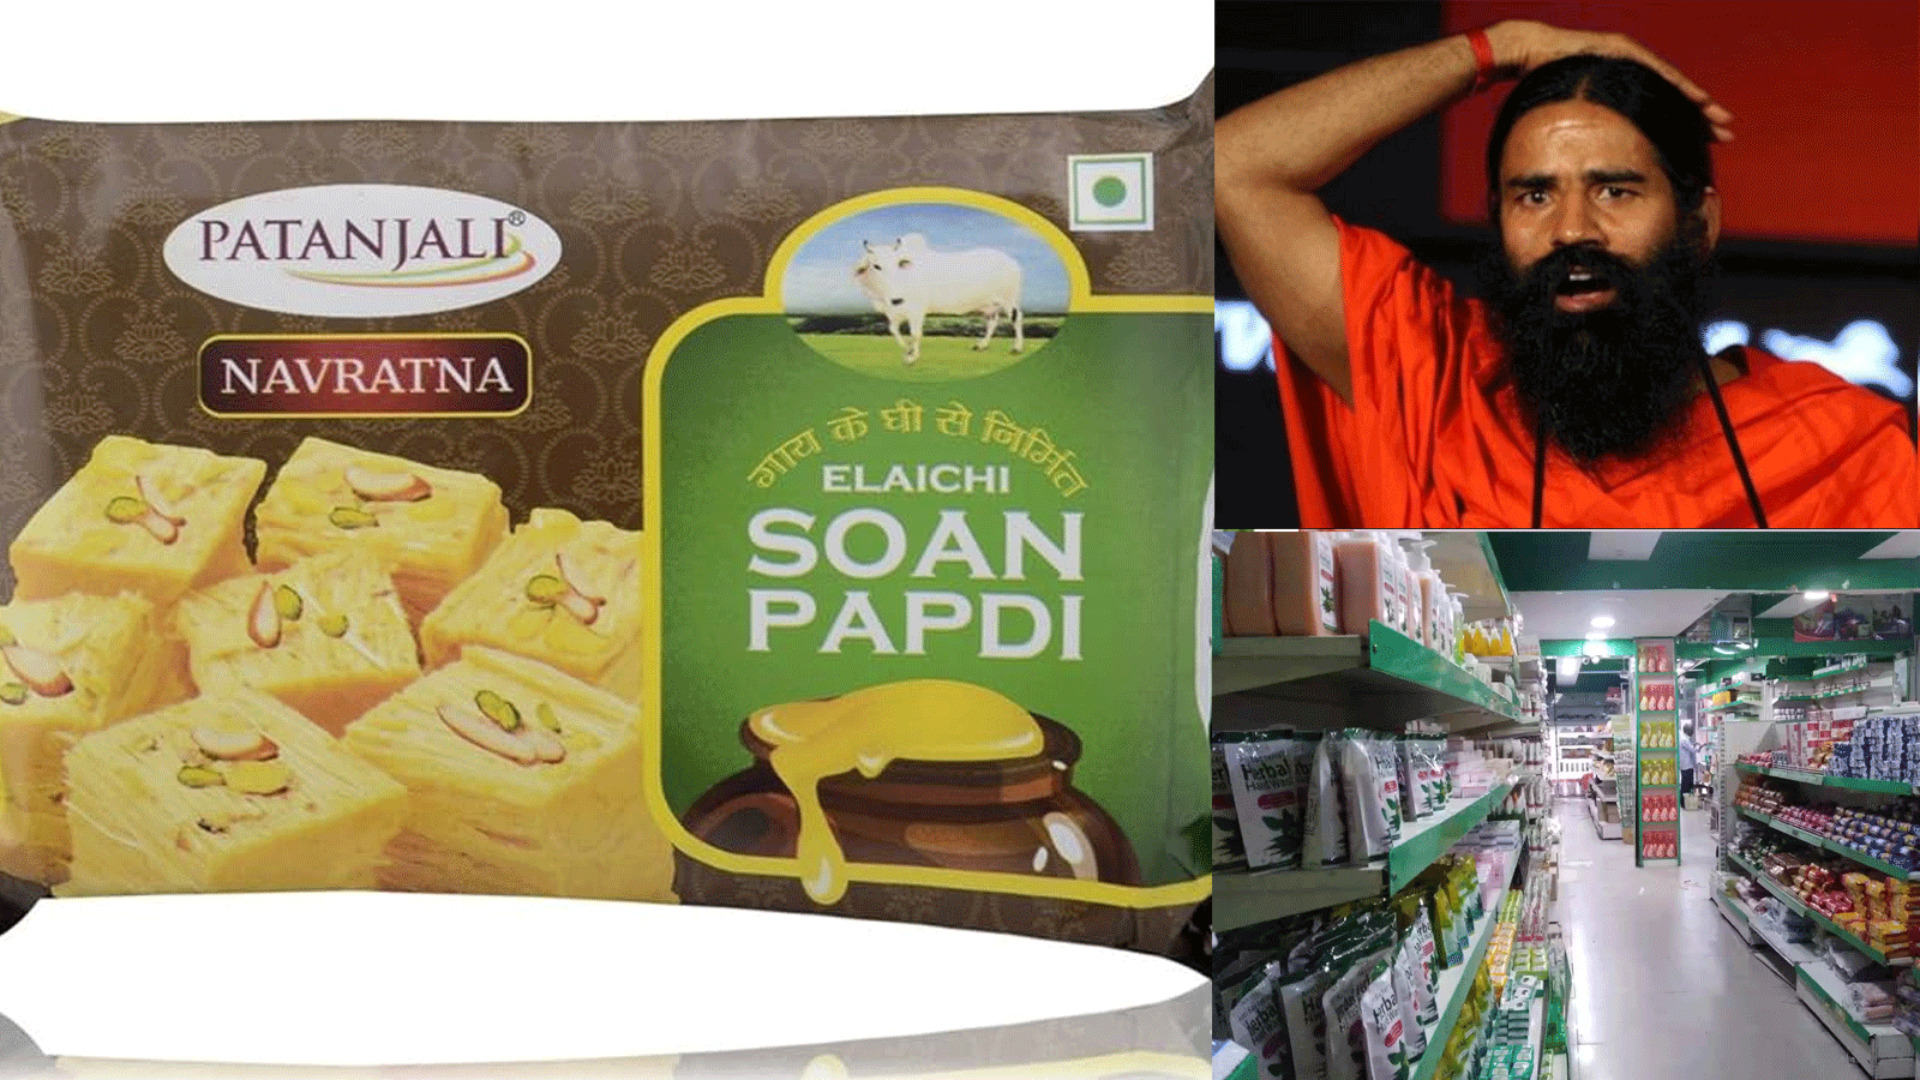 Patanjali's Soan Papdi Fails Quality Test: Company Official and Two Others Arrested